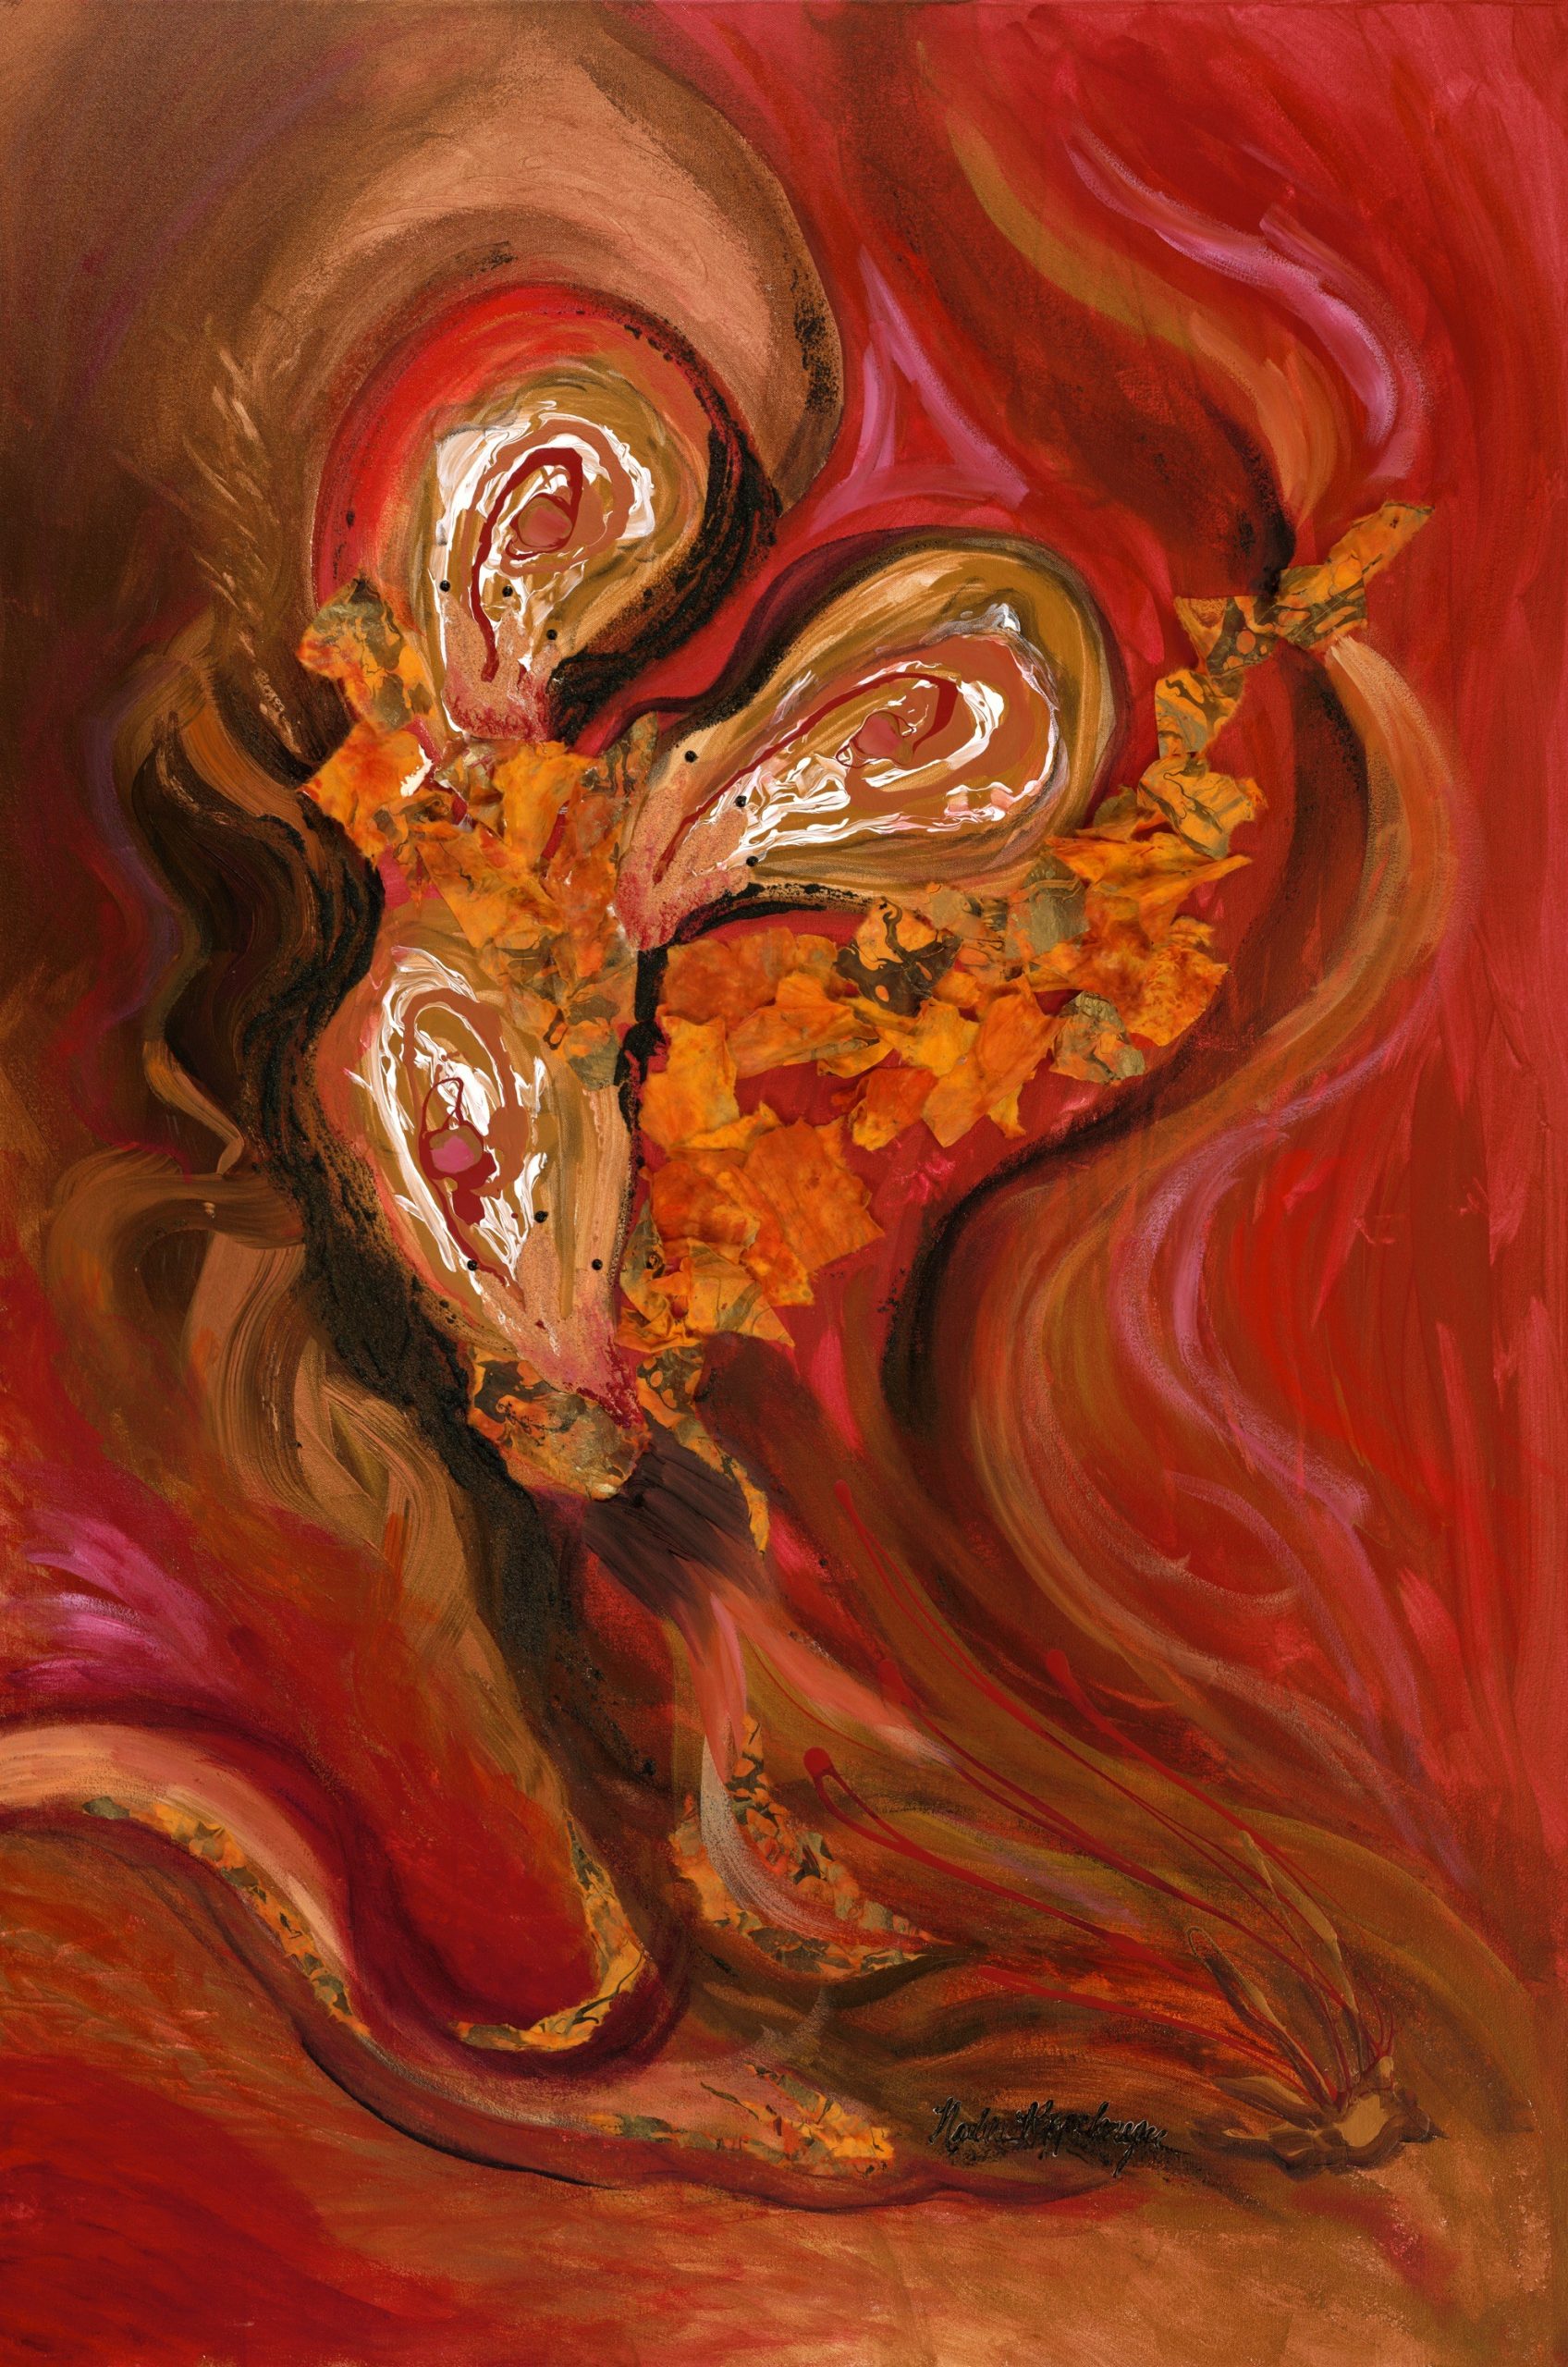 “Flaming Bouquet” by Nadine Ripplemeyer